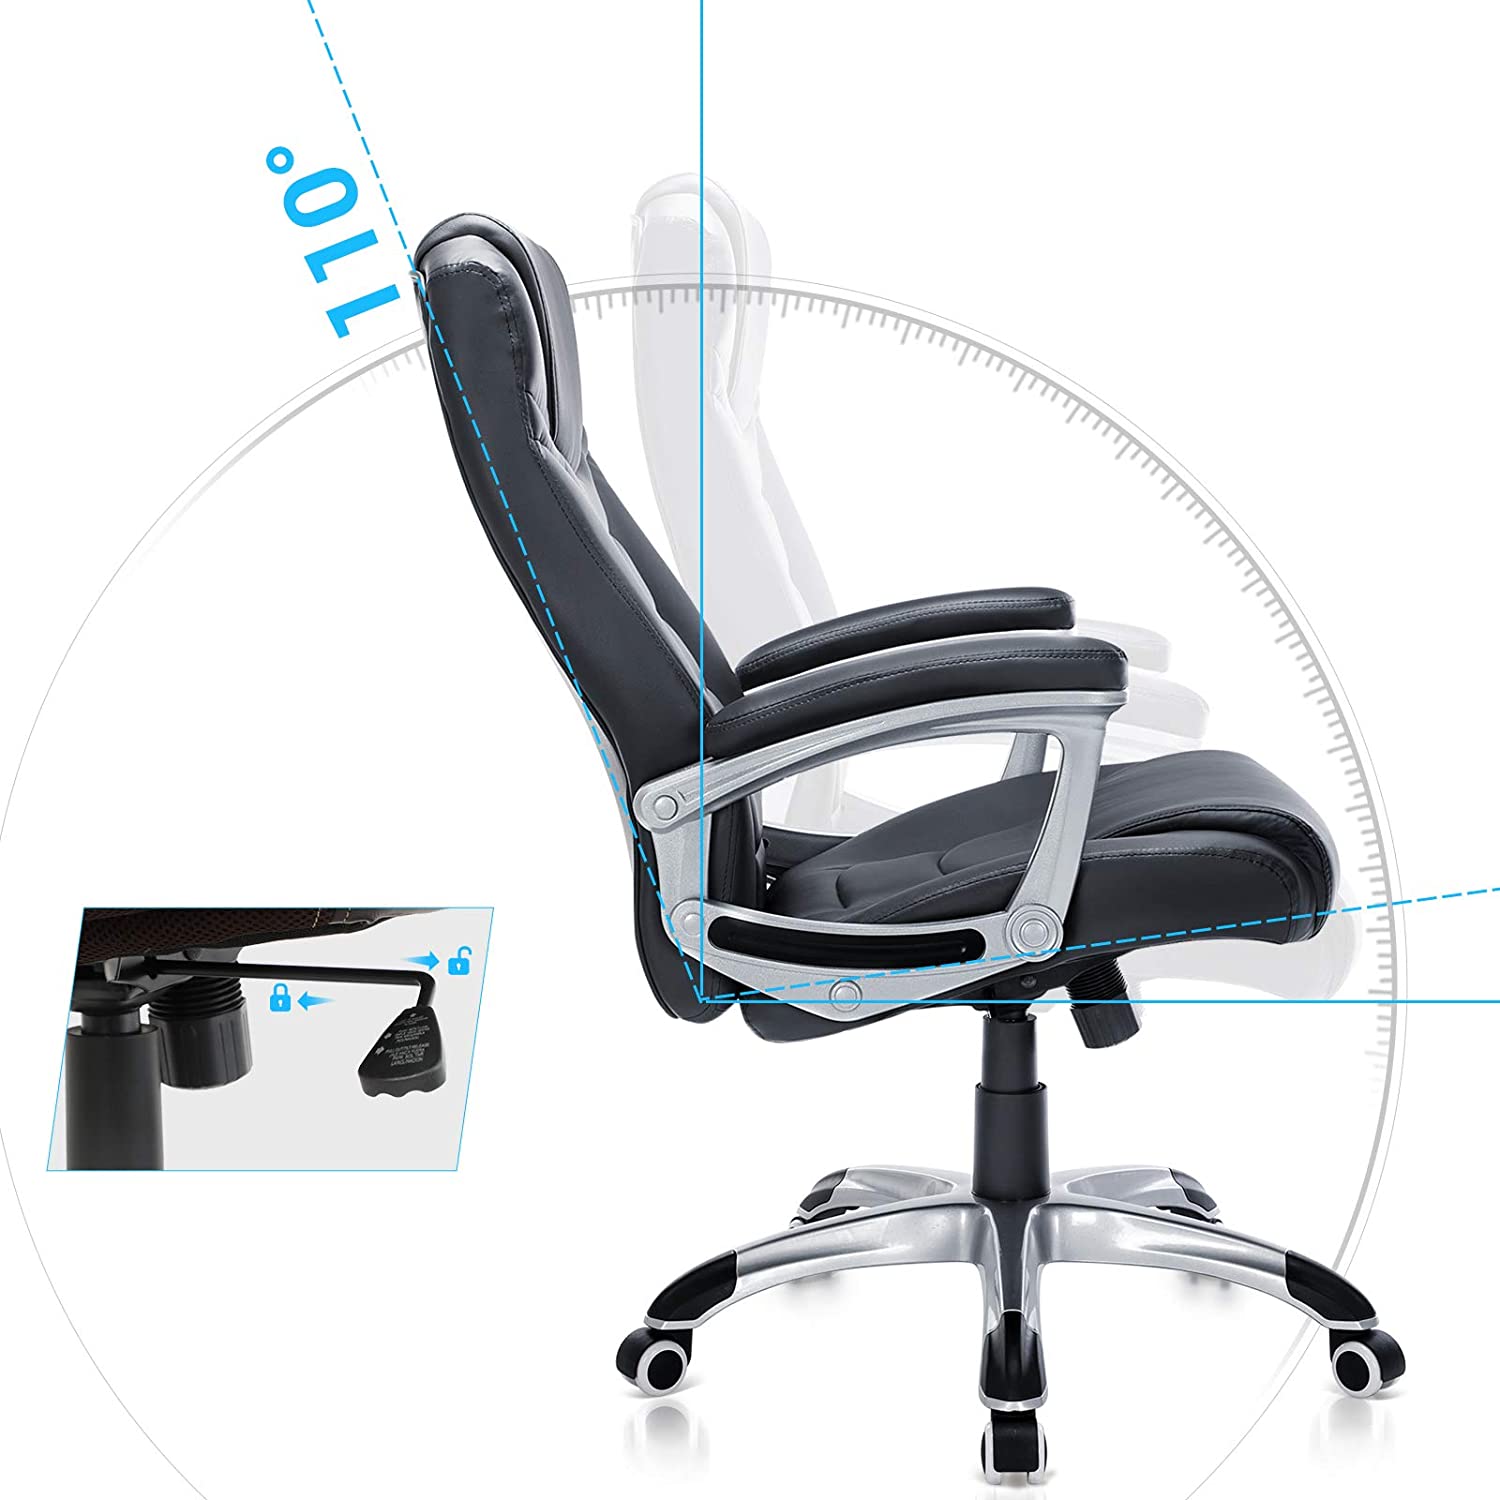 Executive Office Chair, Durable and Stable, Height Adjustable, Ergonomic, Black, OBG21B RAW58.dk 